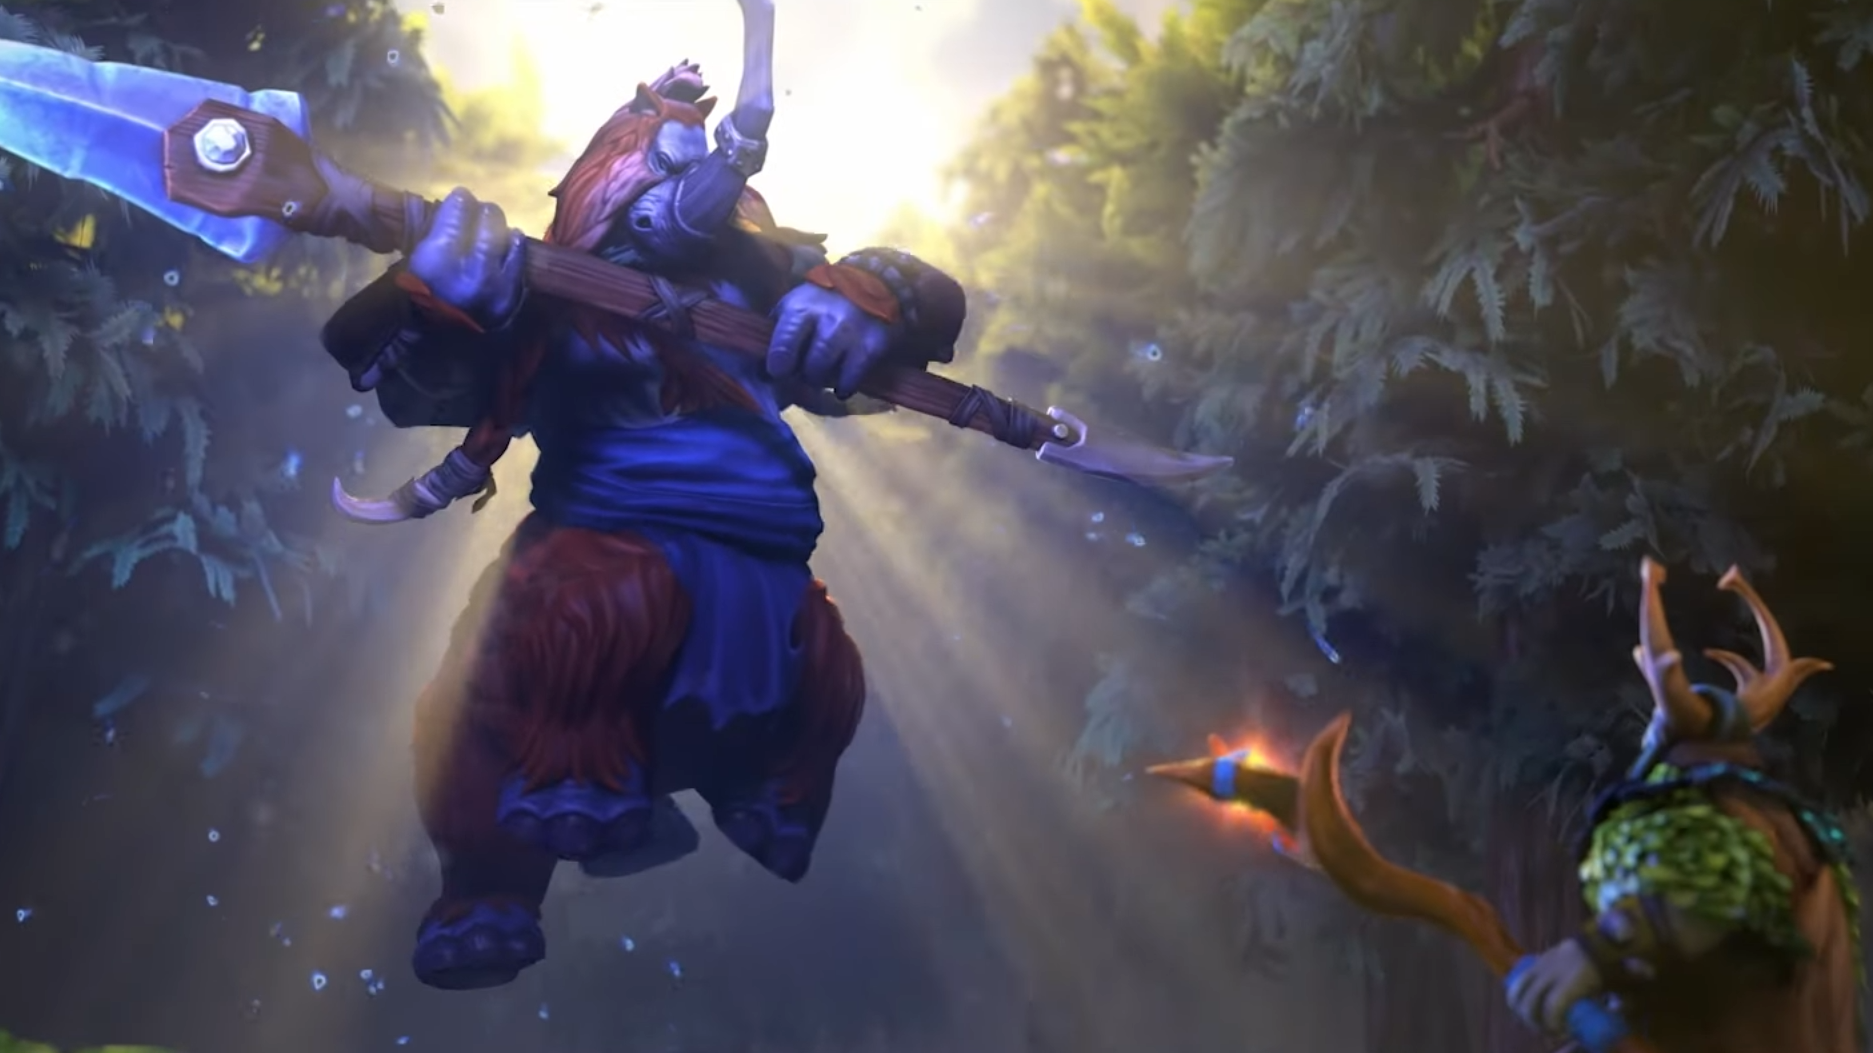 Dota 2 hero Magnus winds up for an attack on Nature's Prophet.